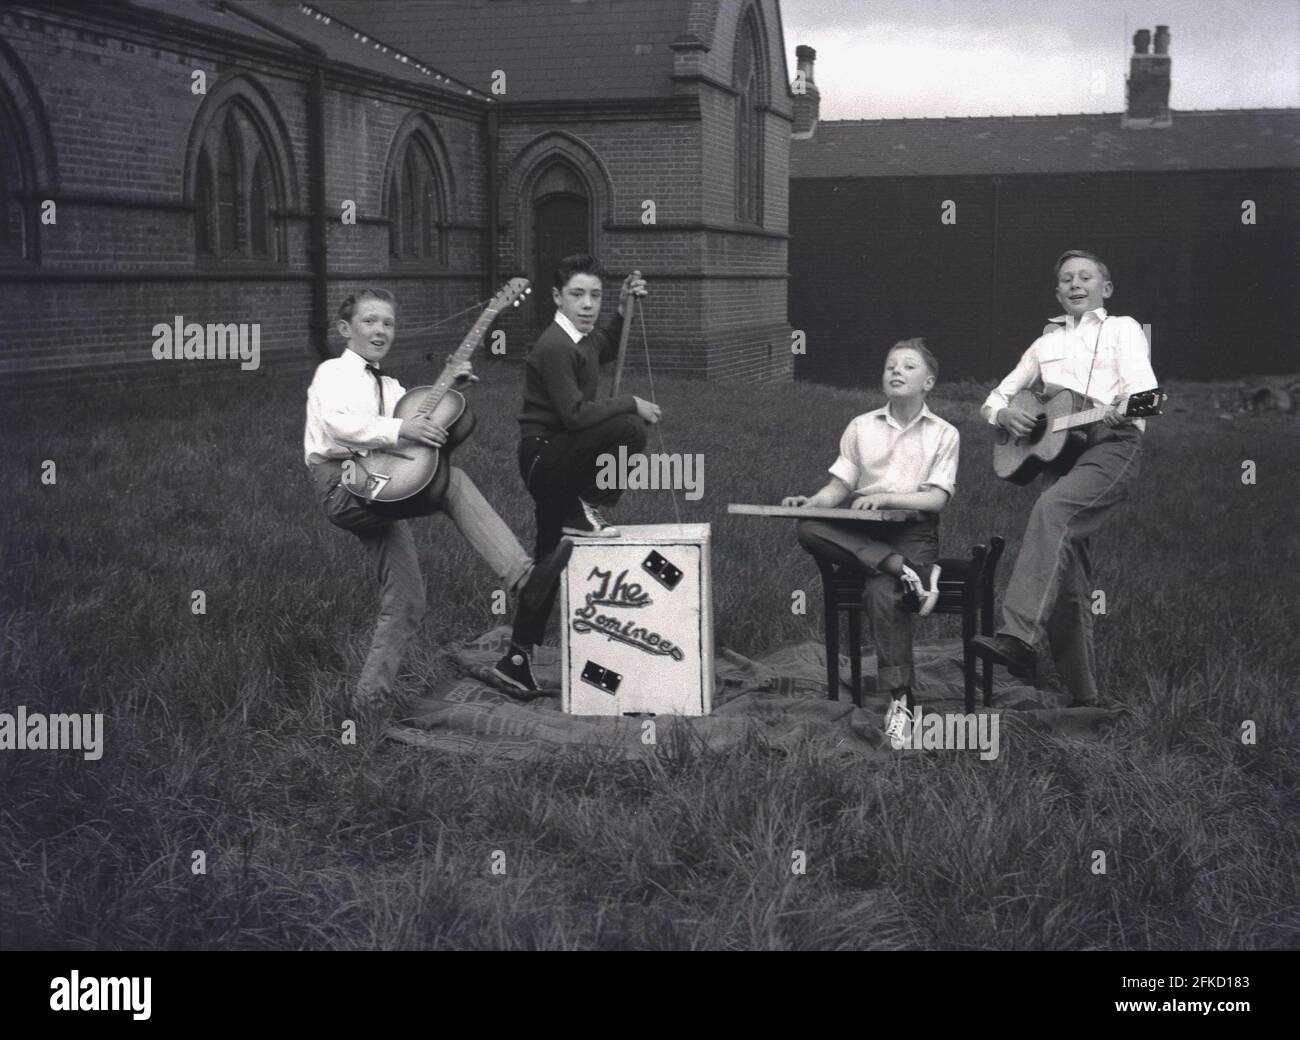 1958, historical, outside in the grounds of a Church, four young lads from the skiffle band, The Dominoes, pose for a picture with their musical instruments, guitars and a washboard, before taking part in the May Queen Carnival. In Britain, May Day was an ancient tradition which celebrated the arrival of Spring and Summer. In many British northern towns, the parade was connected to the Church of England Sunday school. The figure of the May Queen and her purity is linked to ancient worship and folklore. Stock Photo